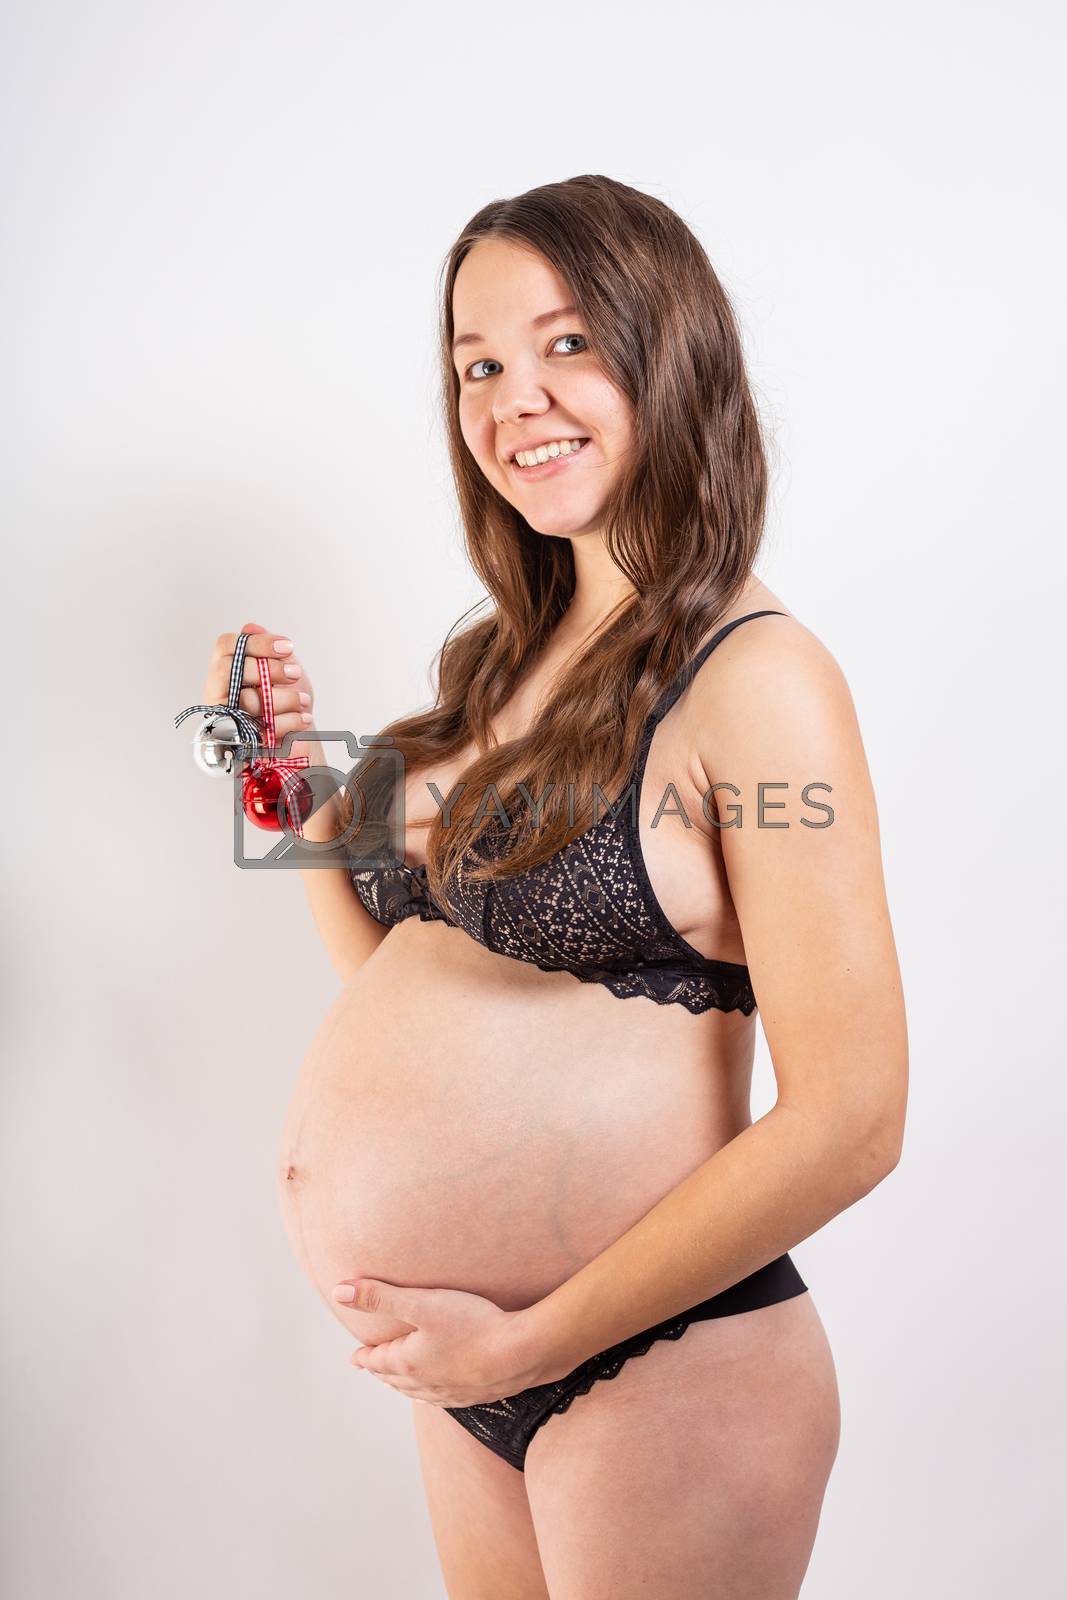 Royalty free image of Beautiful pregnant girl on a white background holds Christmas toys in her hands. by Vassiliy